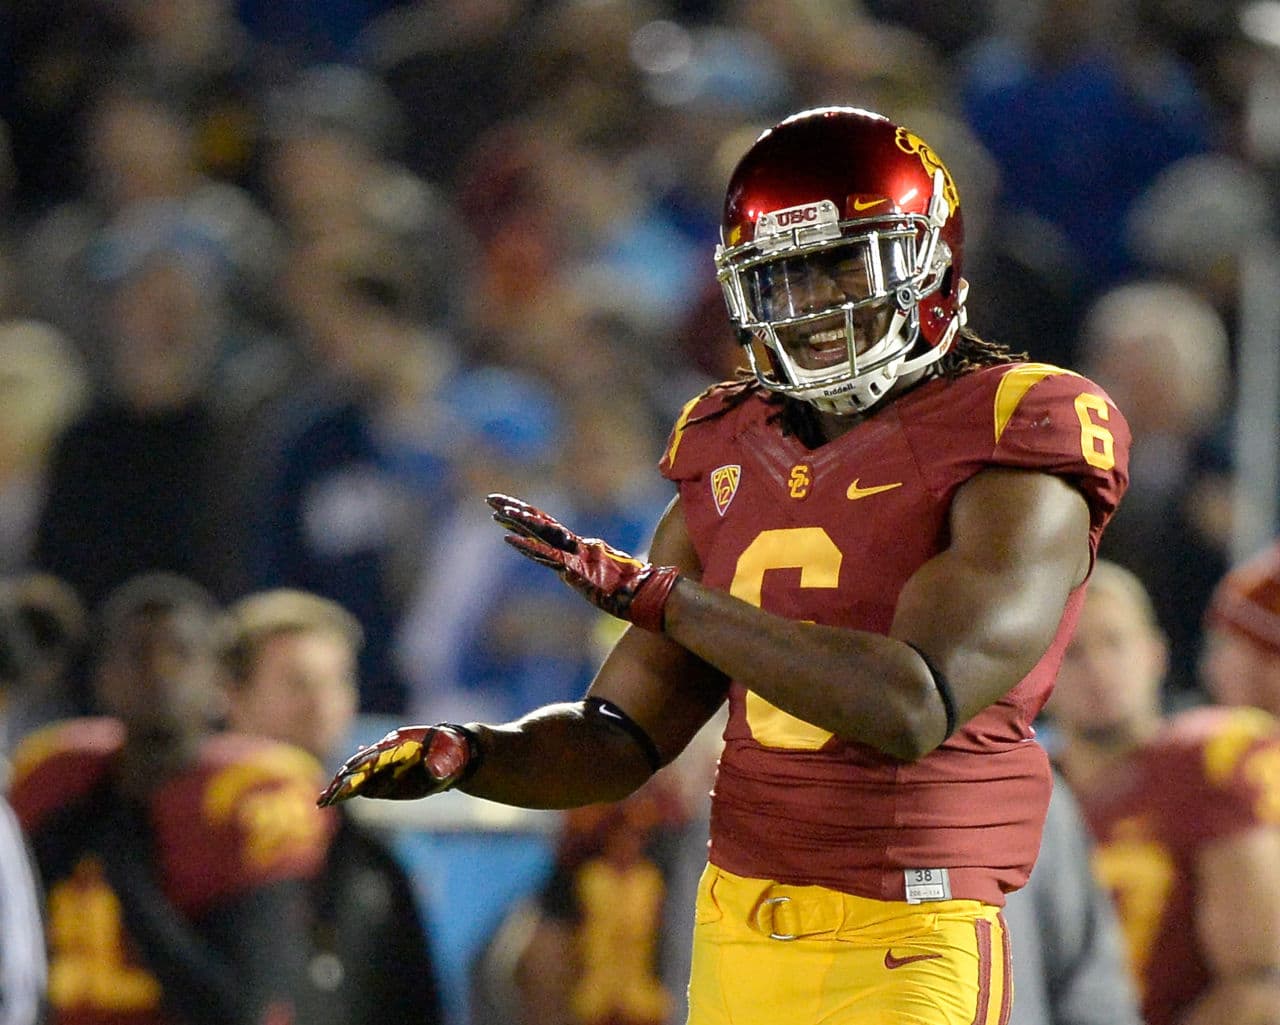 Josh Shaw's first game back after his indefinite suspension came in a 38-14 loss to rival UCLA. (Harry How/Getty Images)